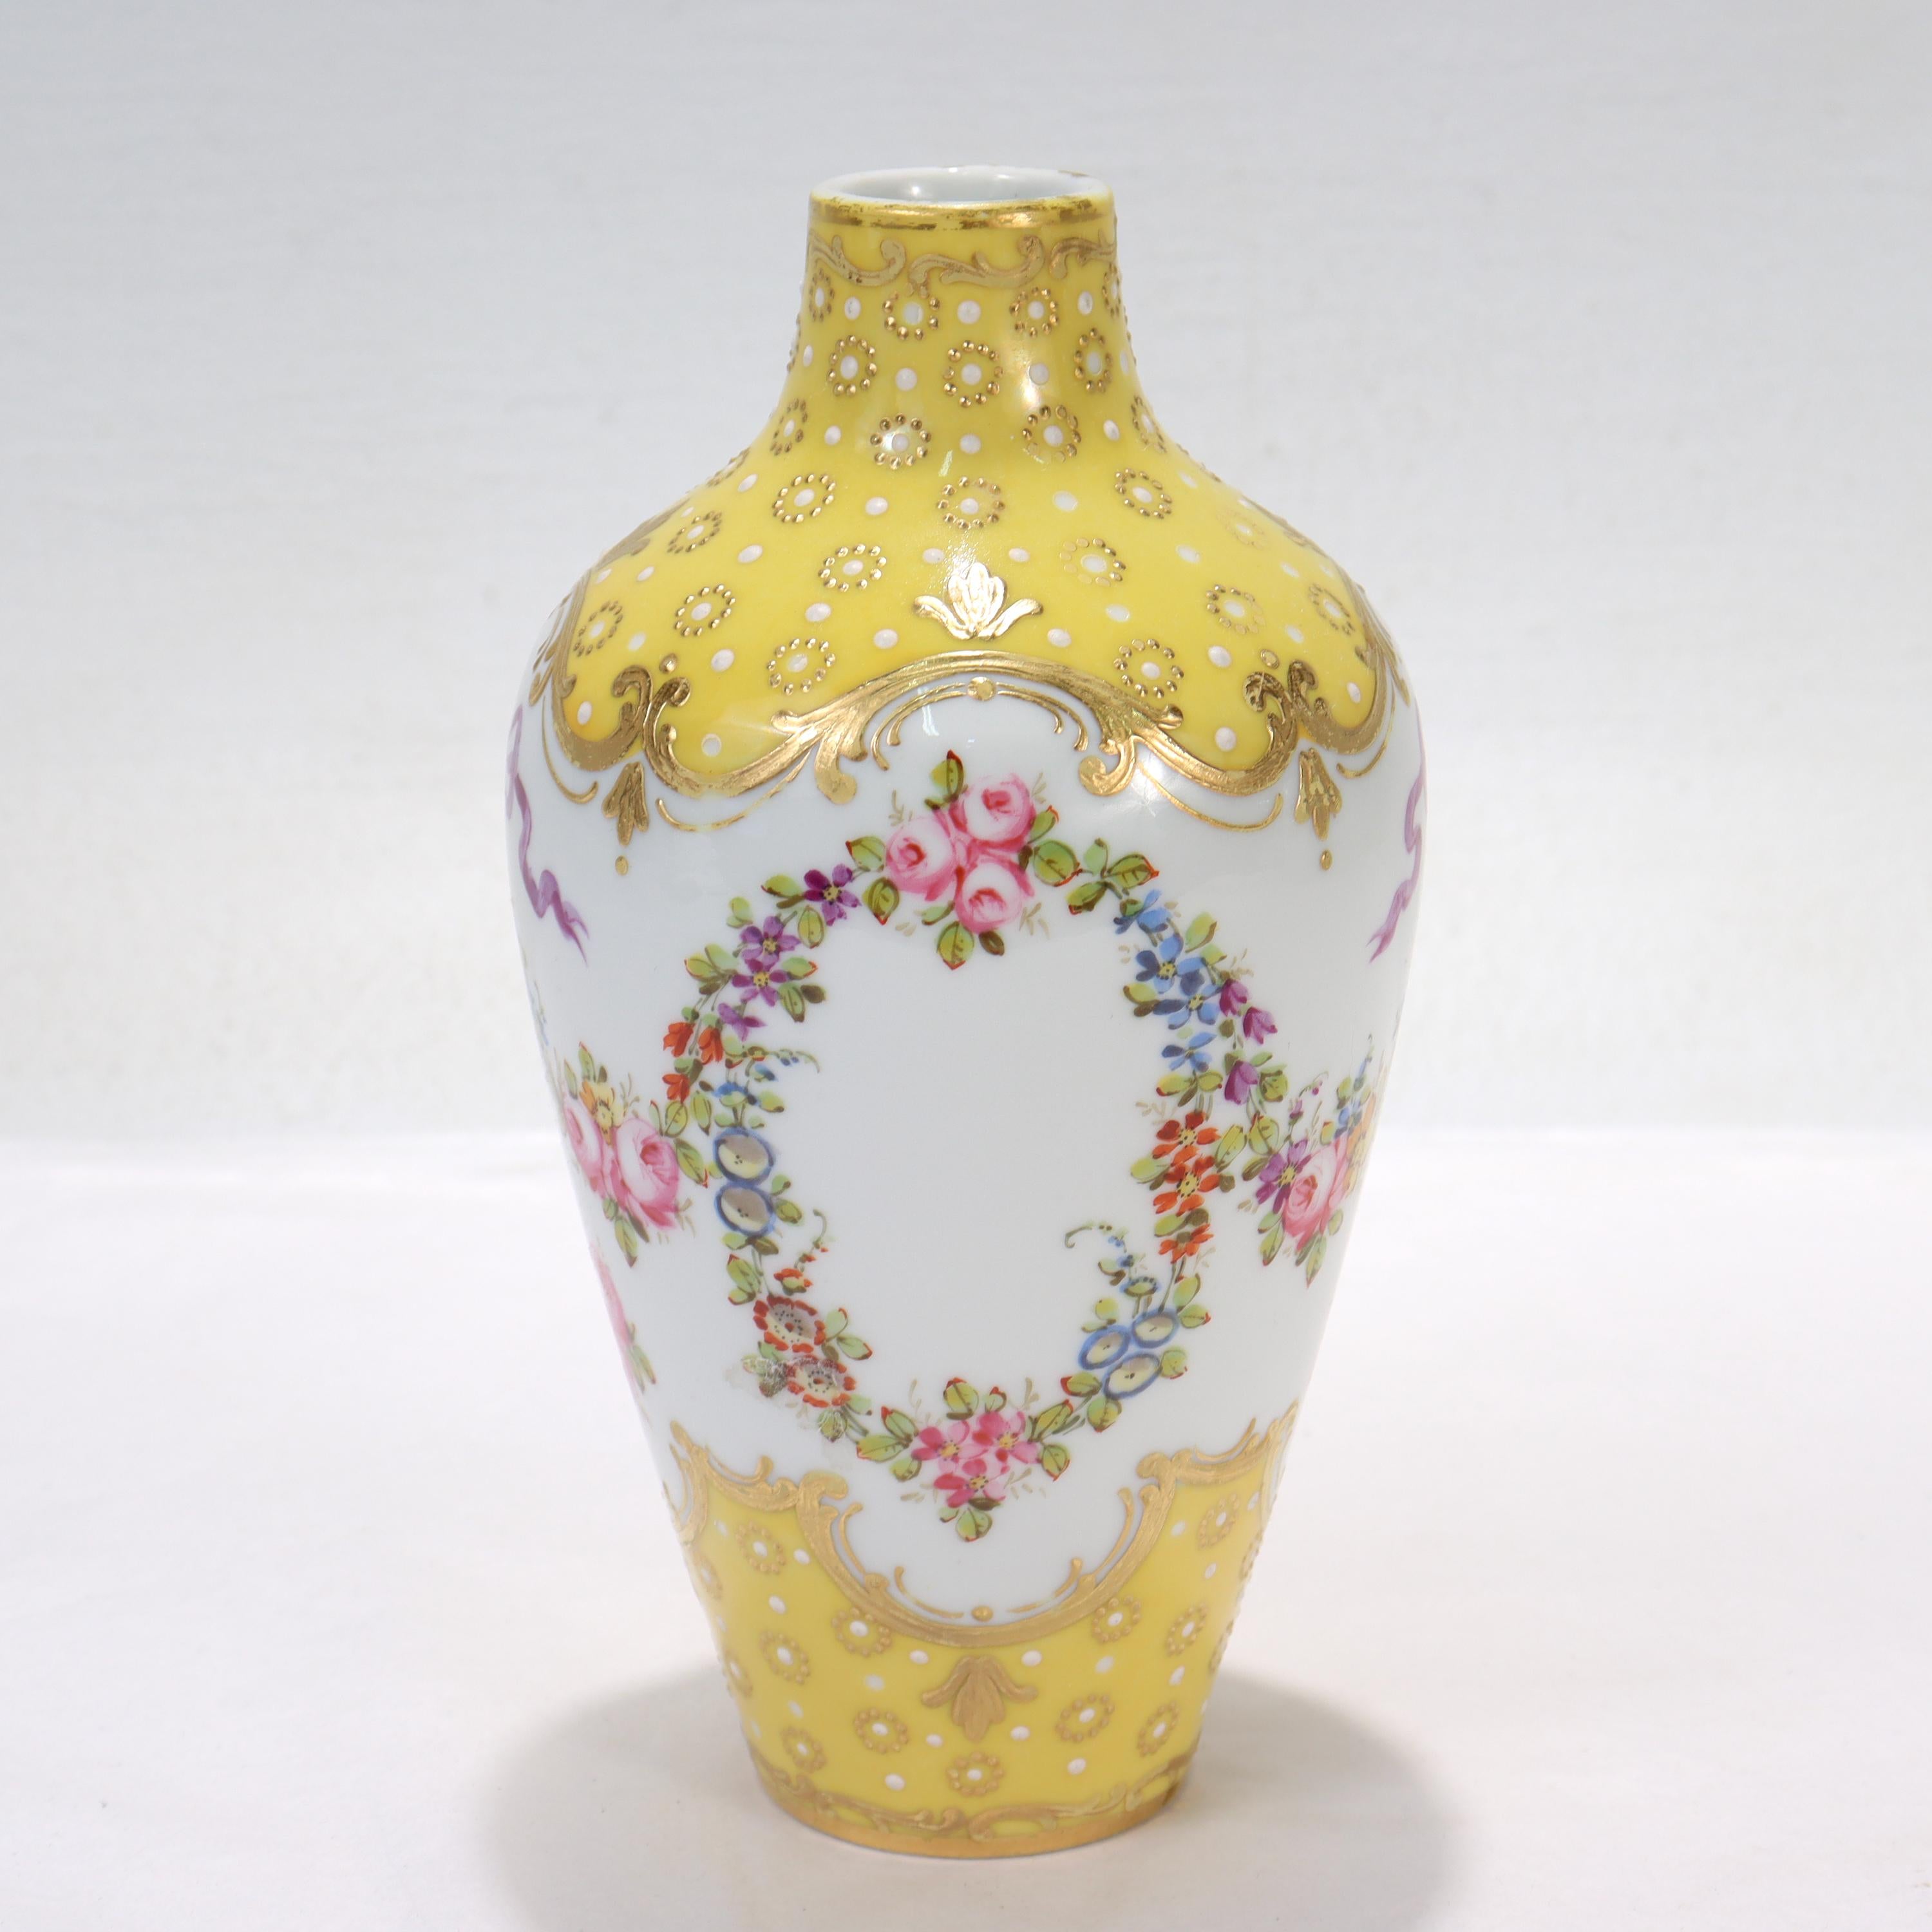 Porcelain Antique French Sevres Type Yellow Ground Jeweled Vase with Garlands & Ribbons